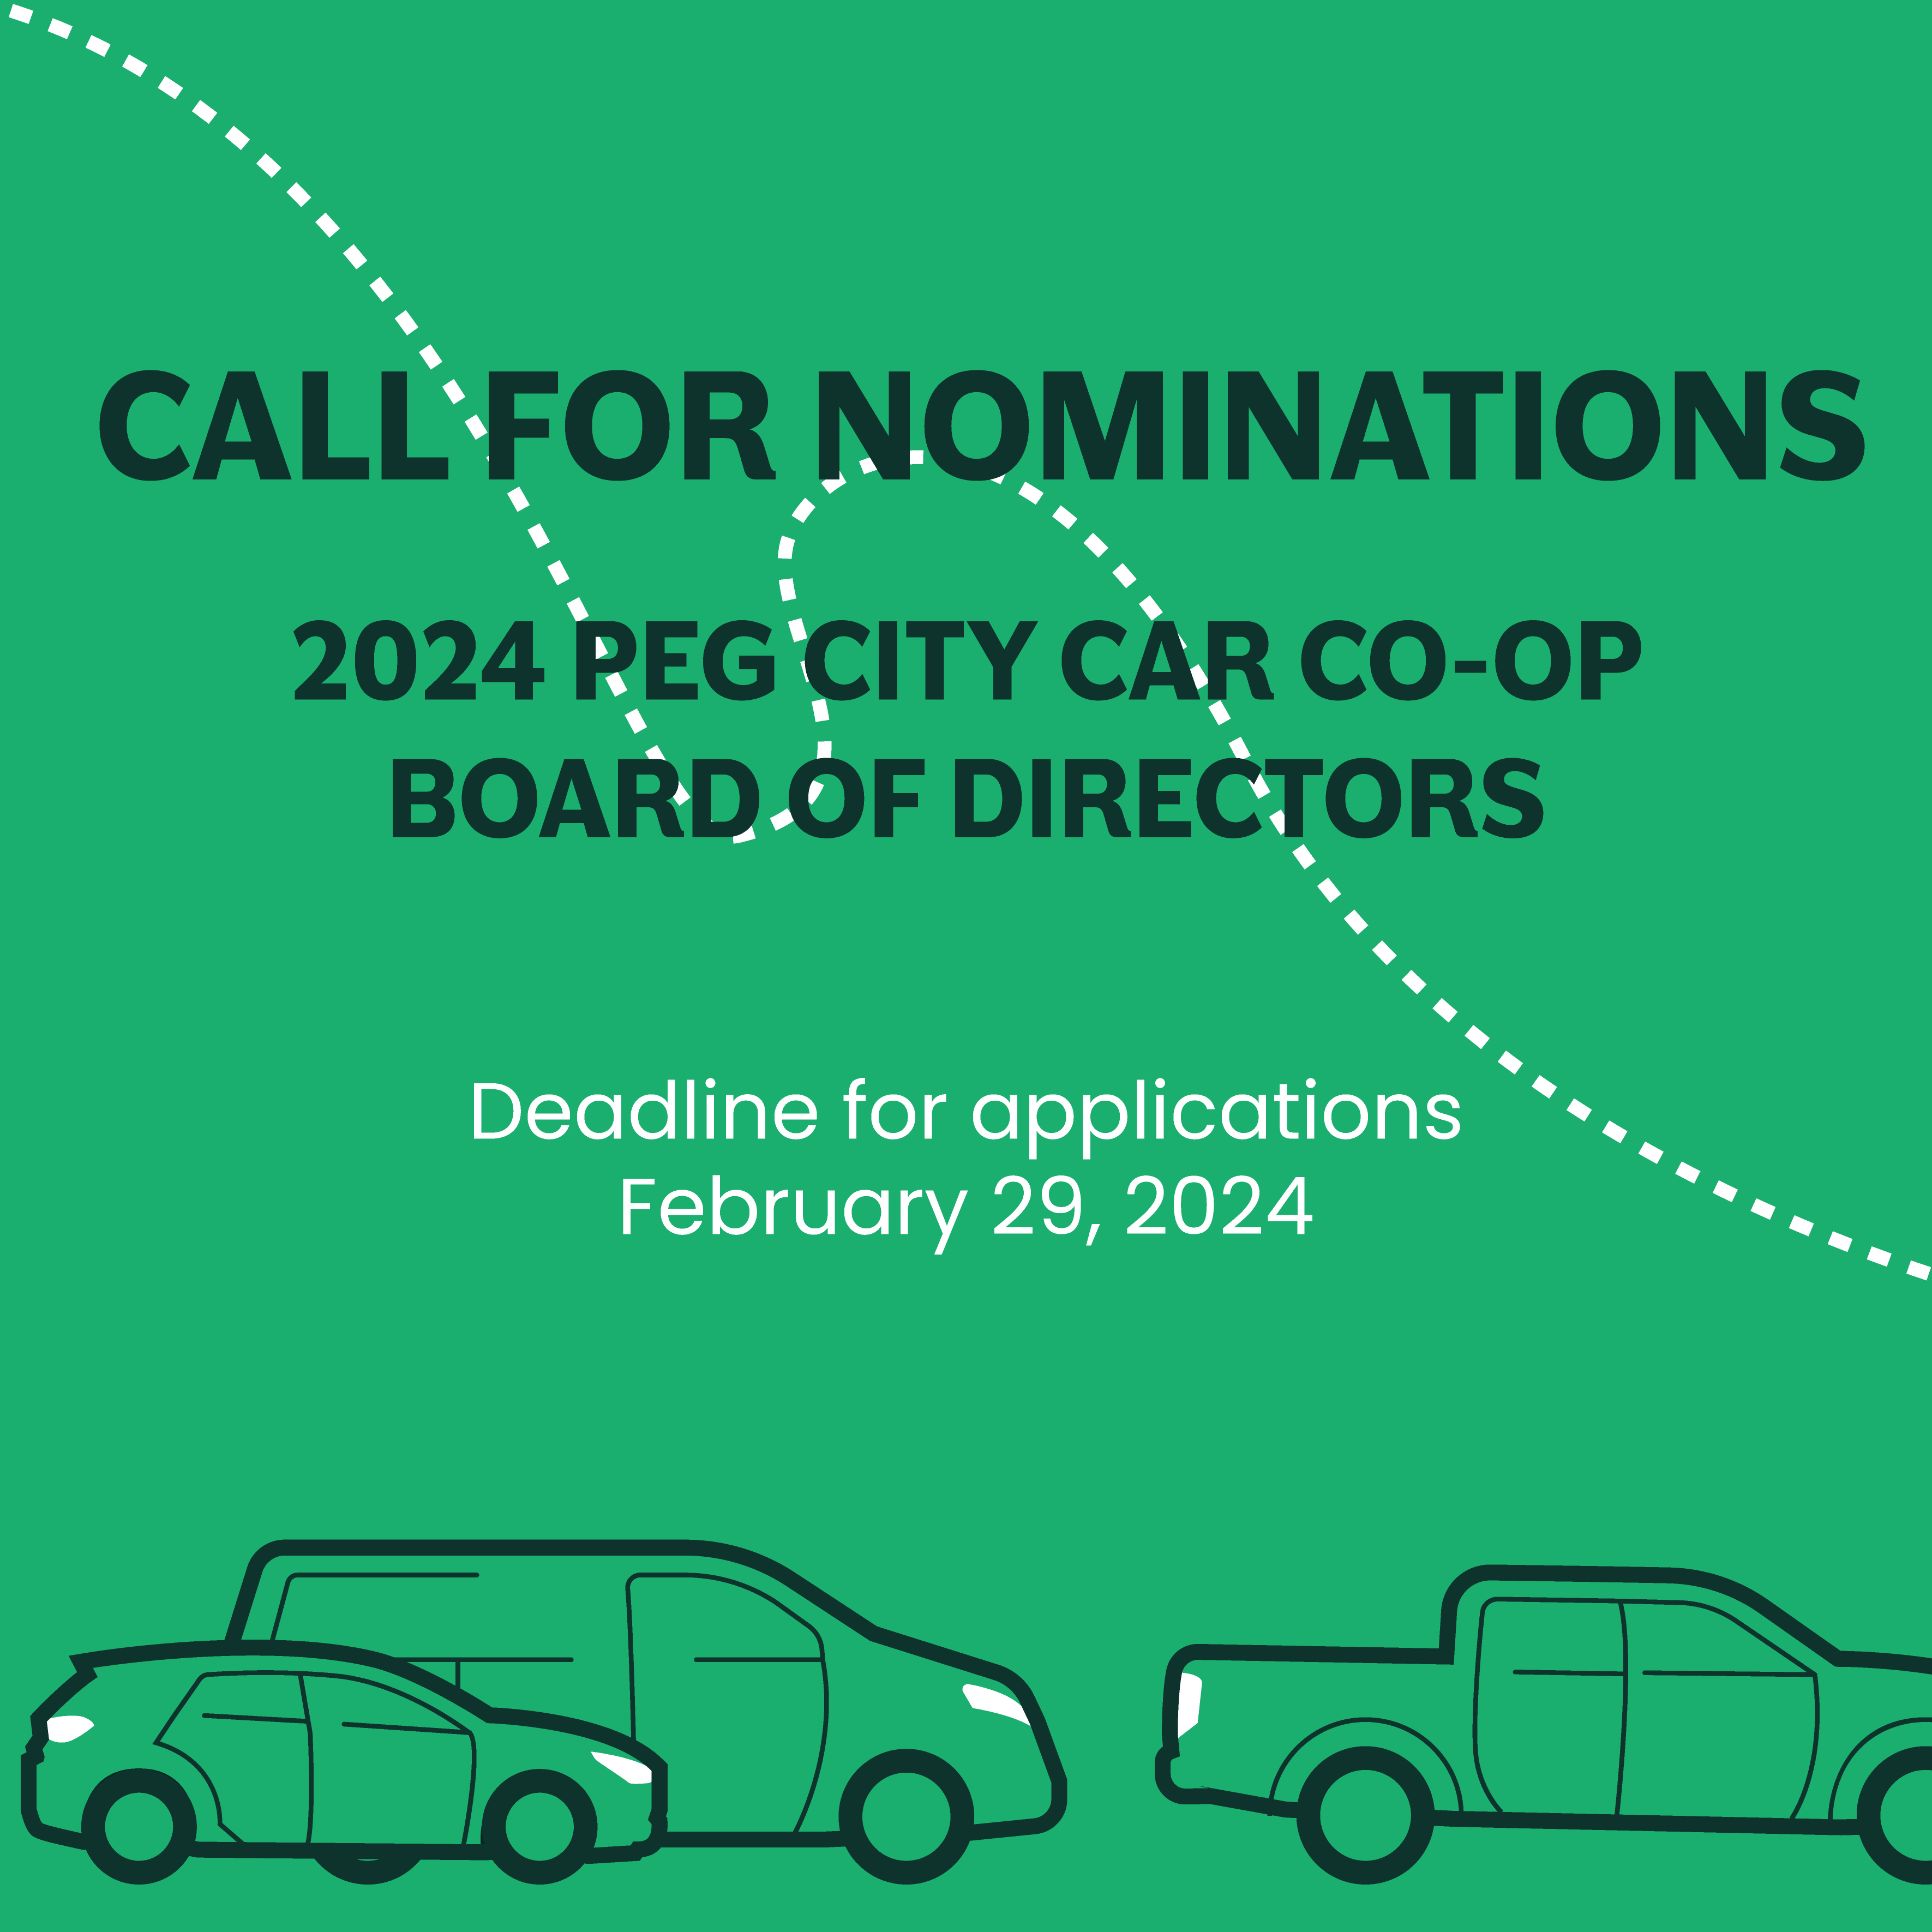 Text and graphic inviting you to join our board in 2024. The deadline for applications February 29, 2024.